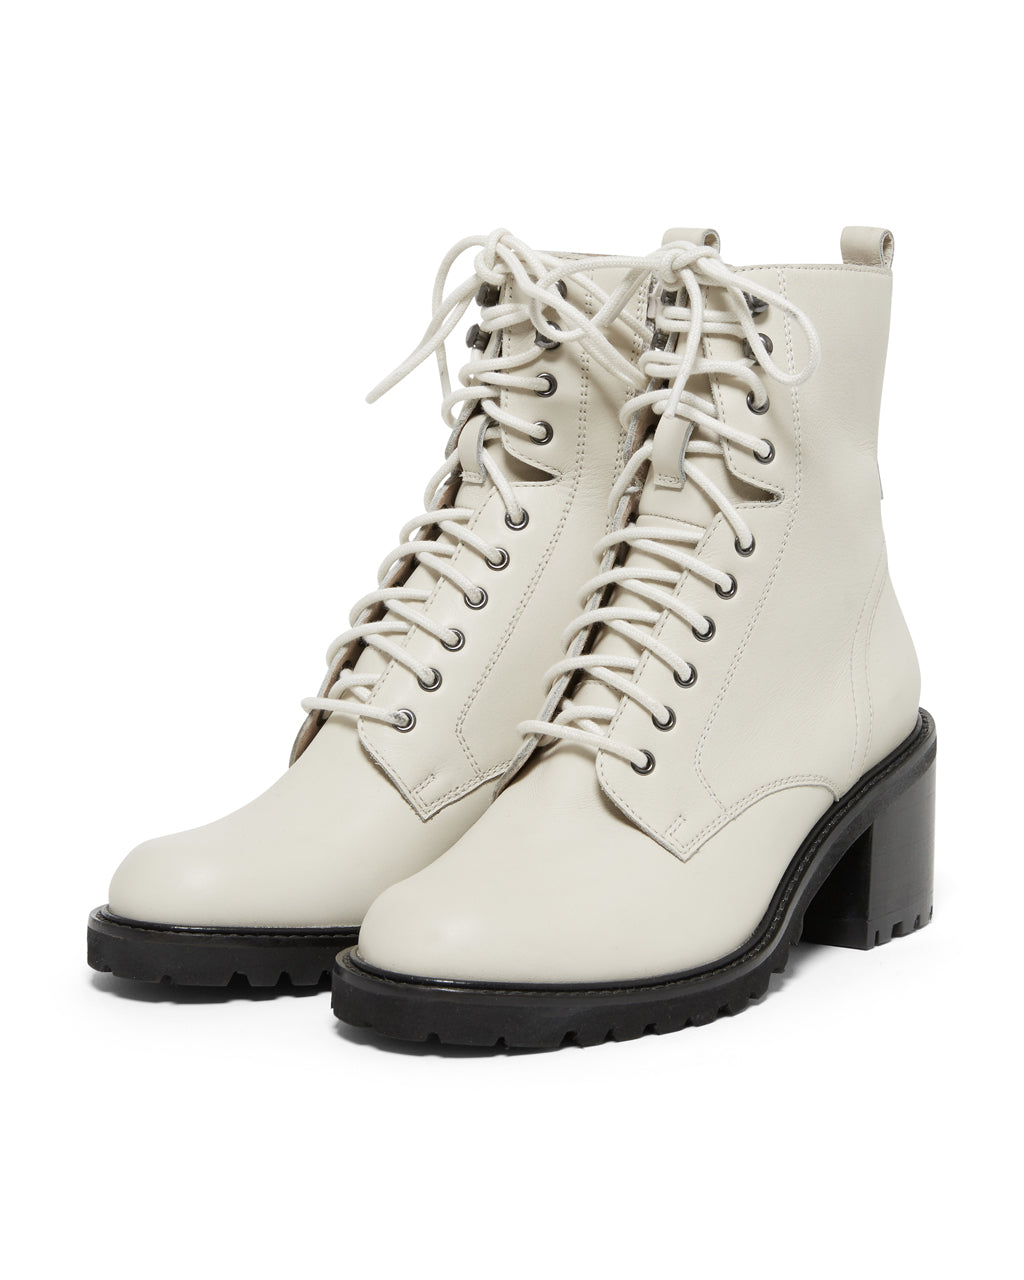 off white leather combat boots